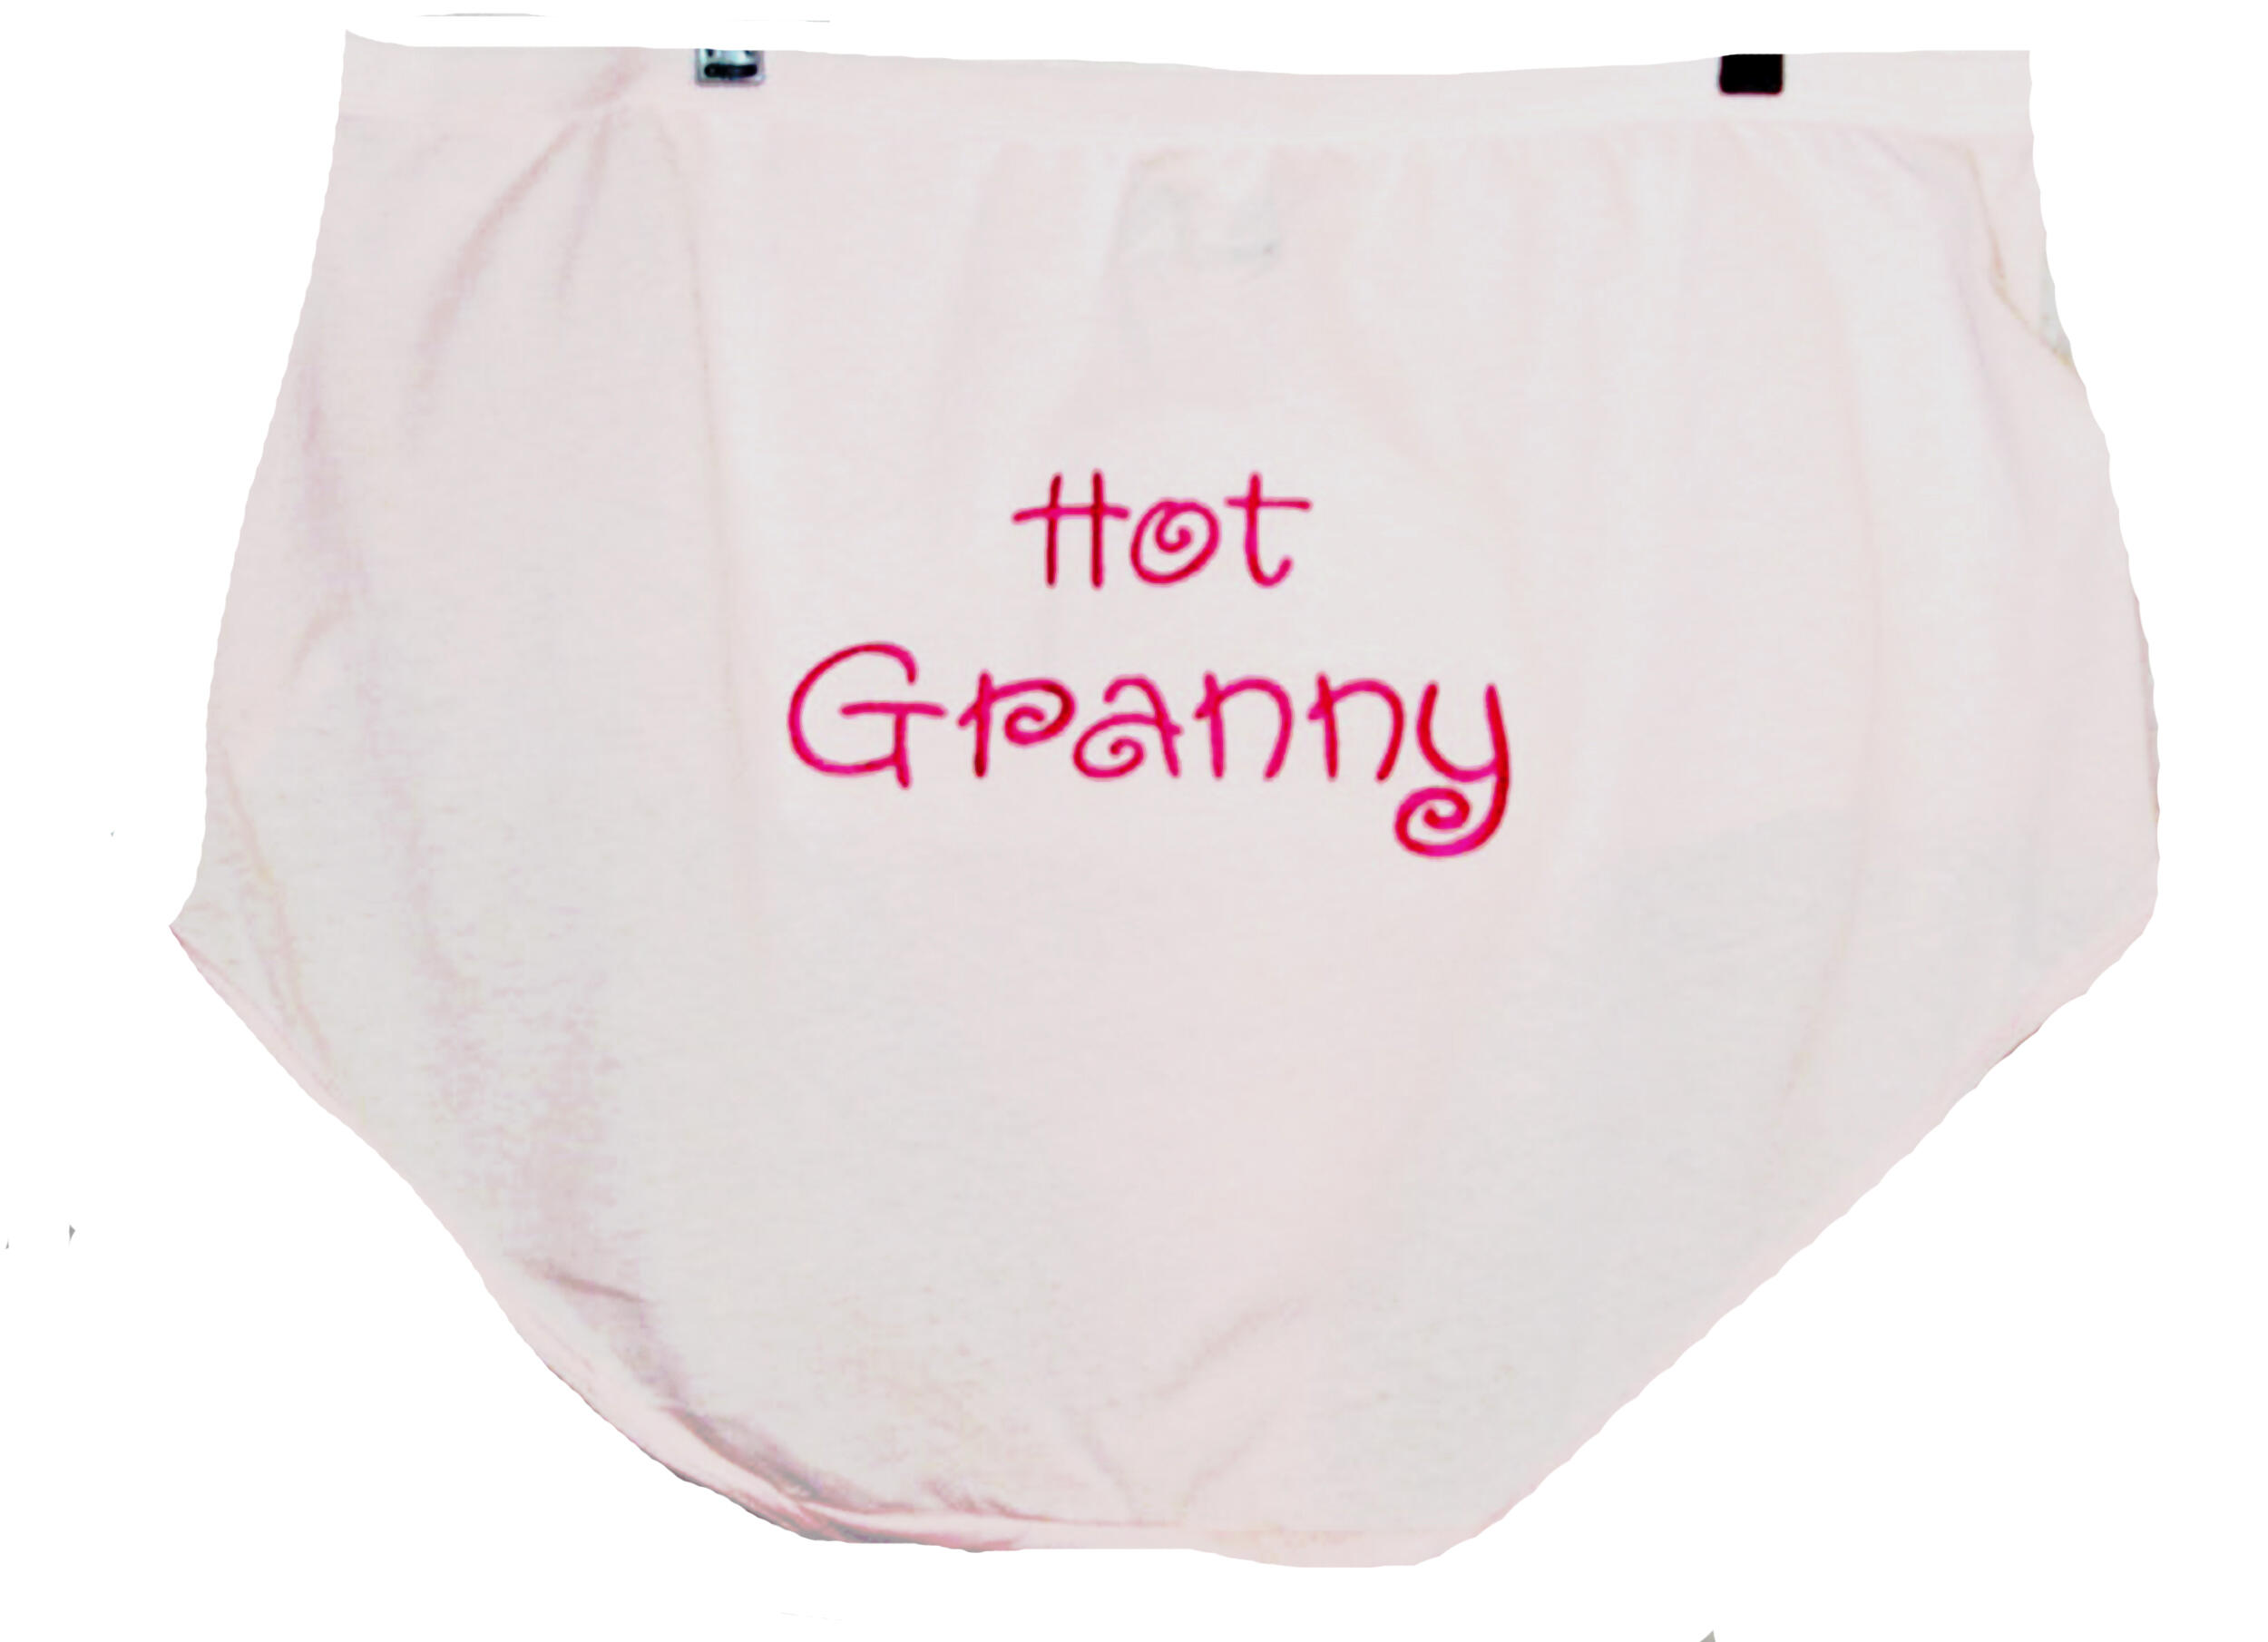 Customized Underwear/Bachelorette Gift/Gift For Her/Wedding Gift/Funny Gift  For Her/ Personalized Underwear/Underwear With Face